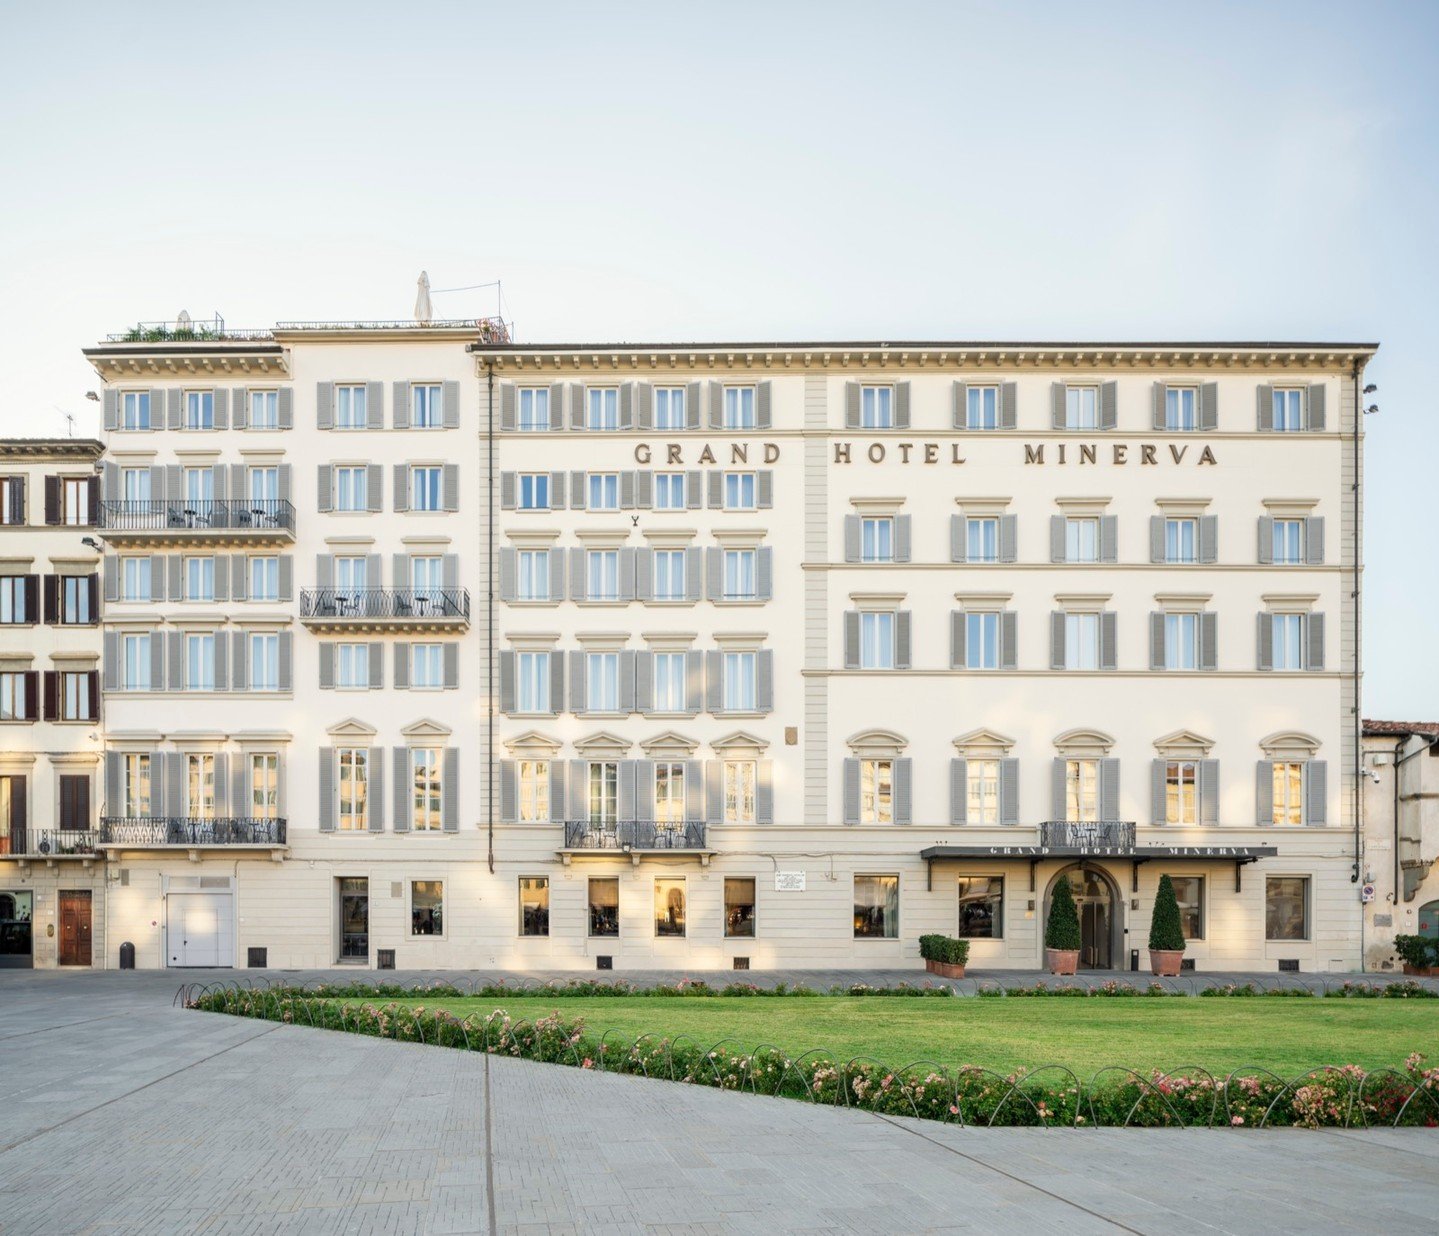 Let me introduce you to two incredible hotels that will elevate your experience in Italy:

🏨 Nestled in the heart of Florence, the Grand Hotel Minerva offers breathtaking views of the city's iconic landmarks. Just steps away from attractions like th